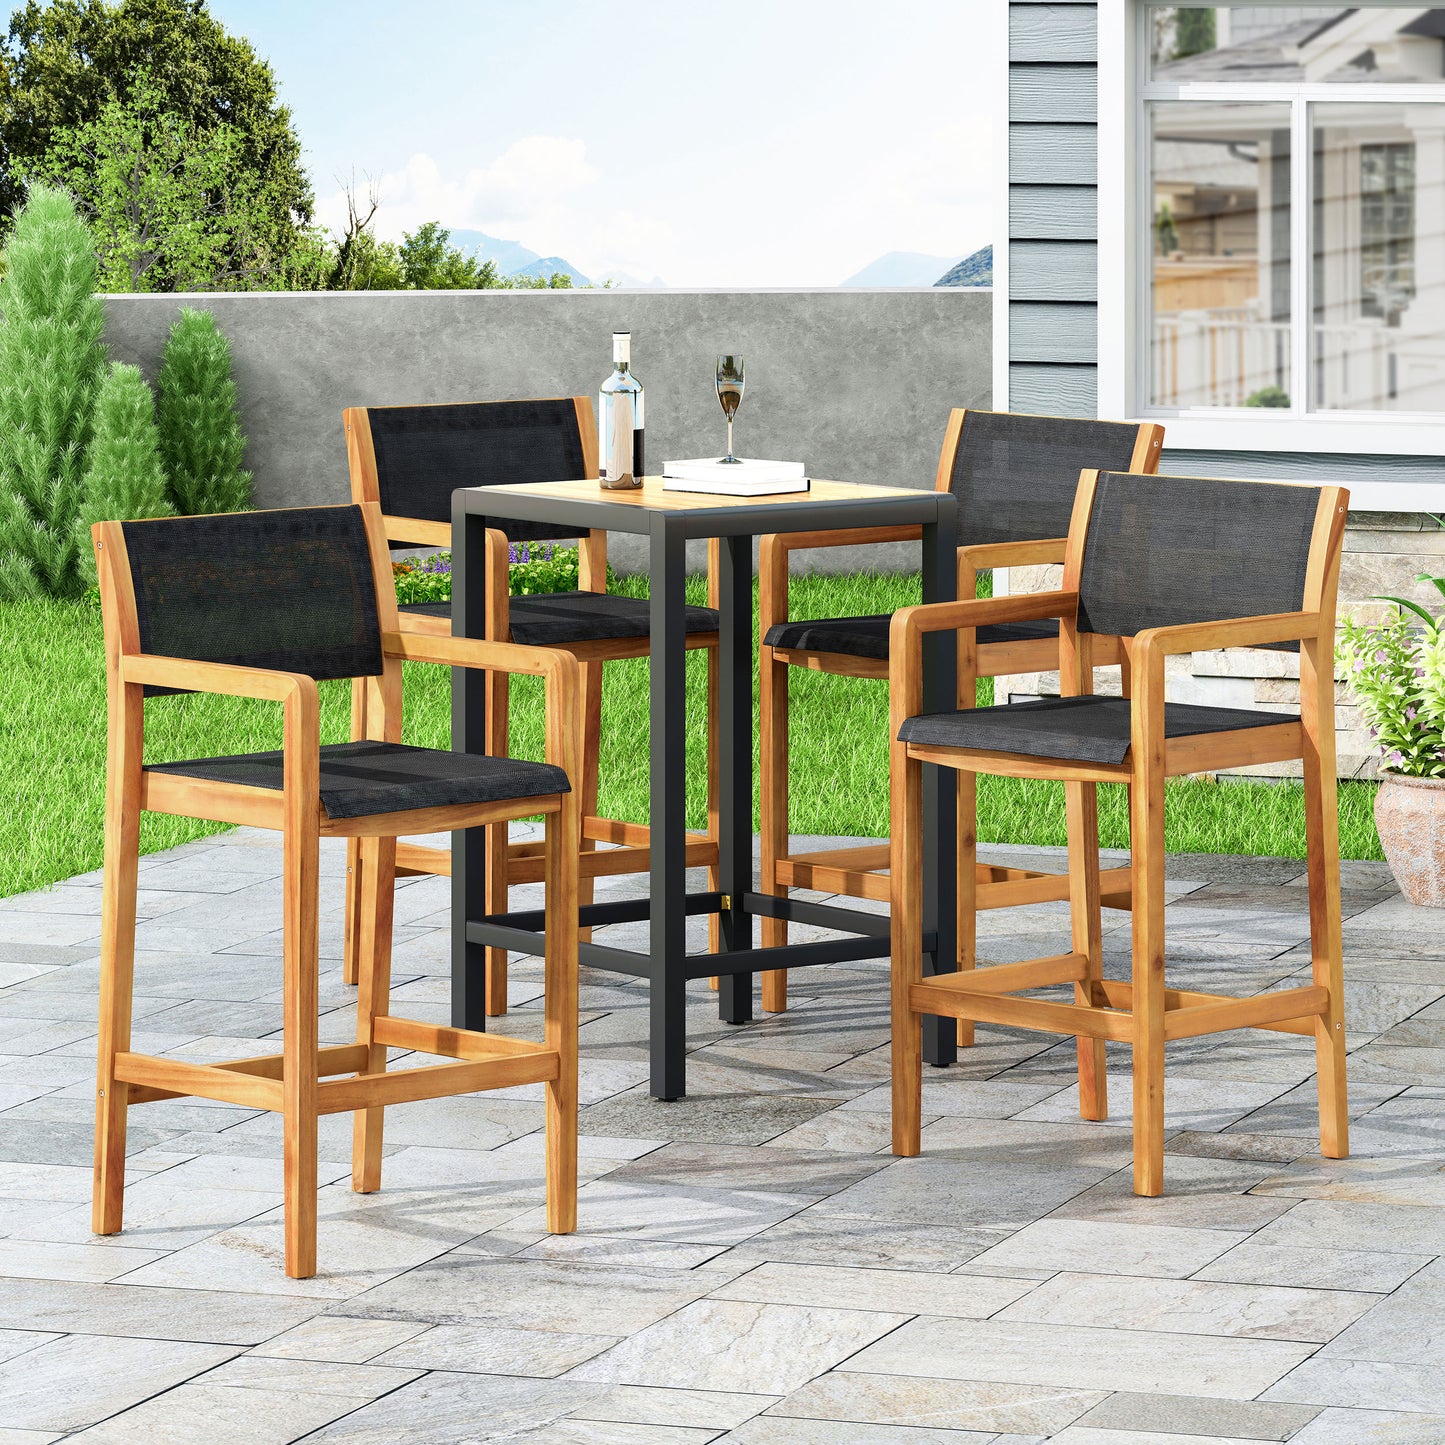 Daiquan Outdoor Acacia Wood Barstools with Outdoor Mesh (Set of 4)